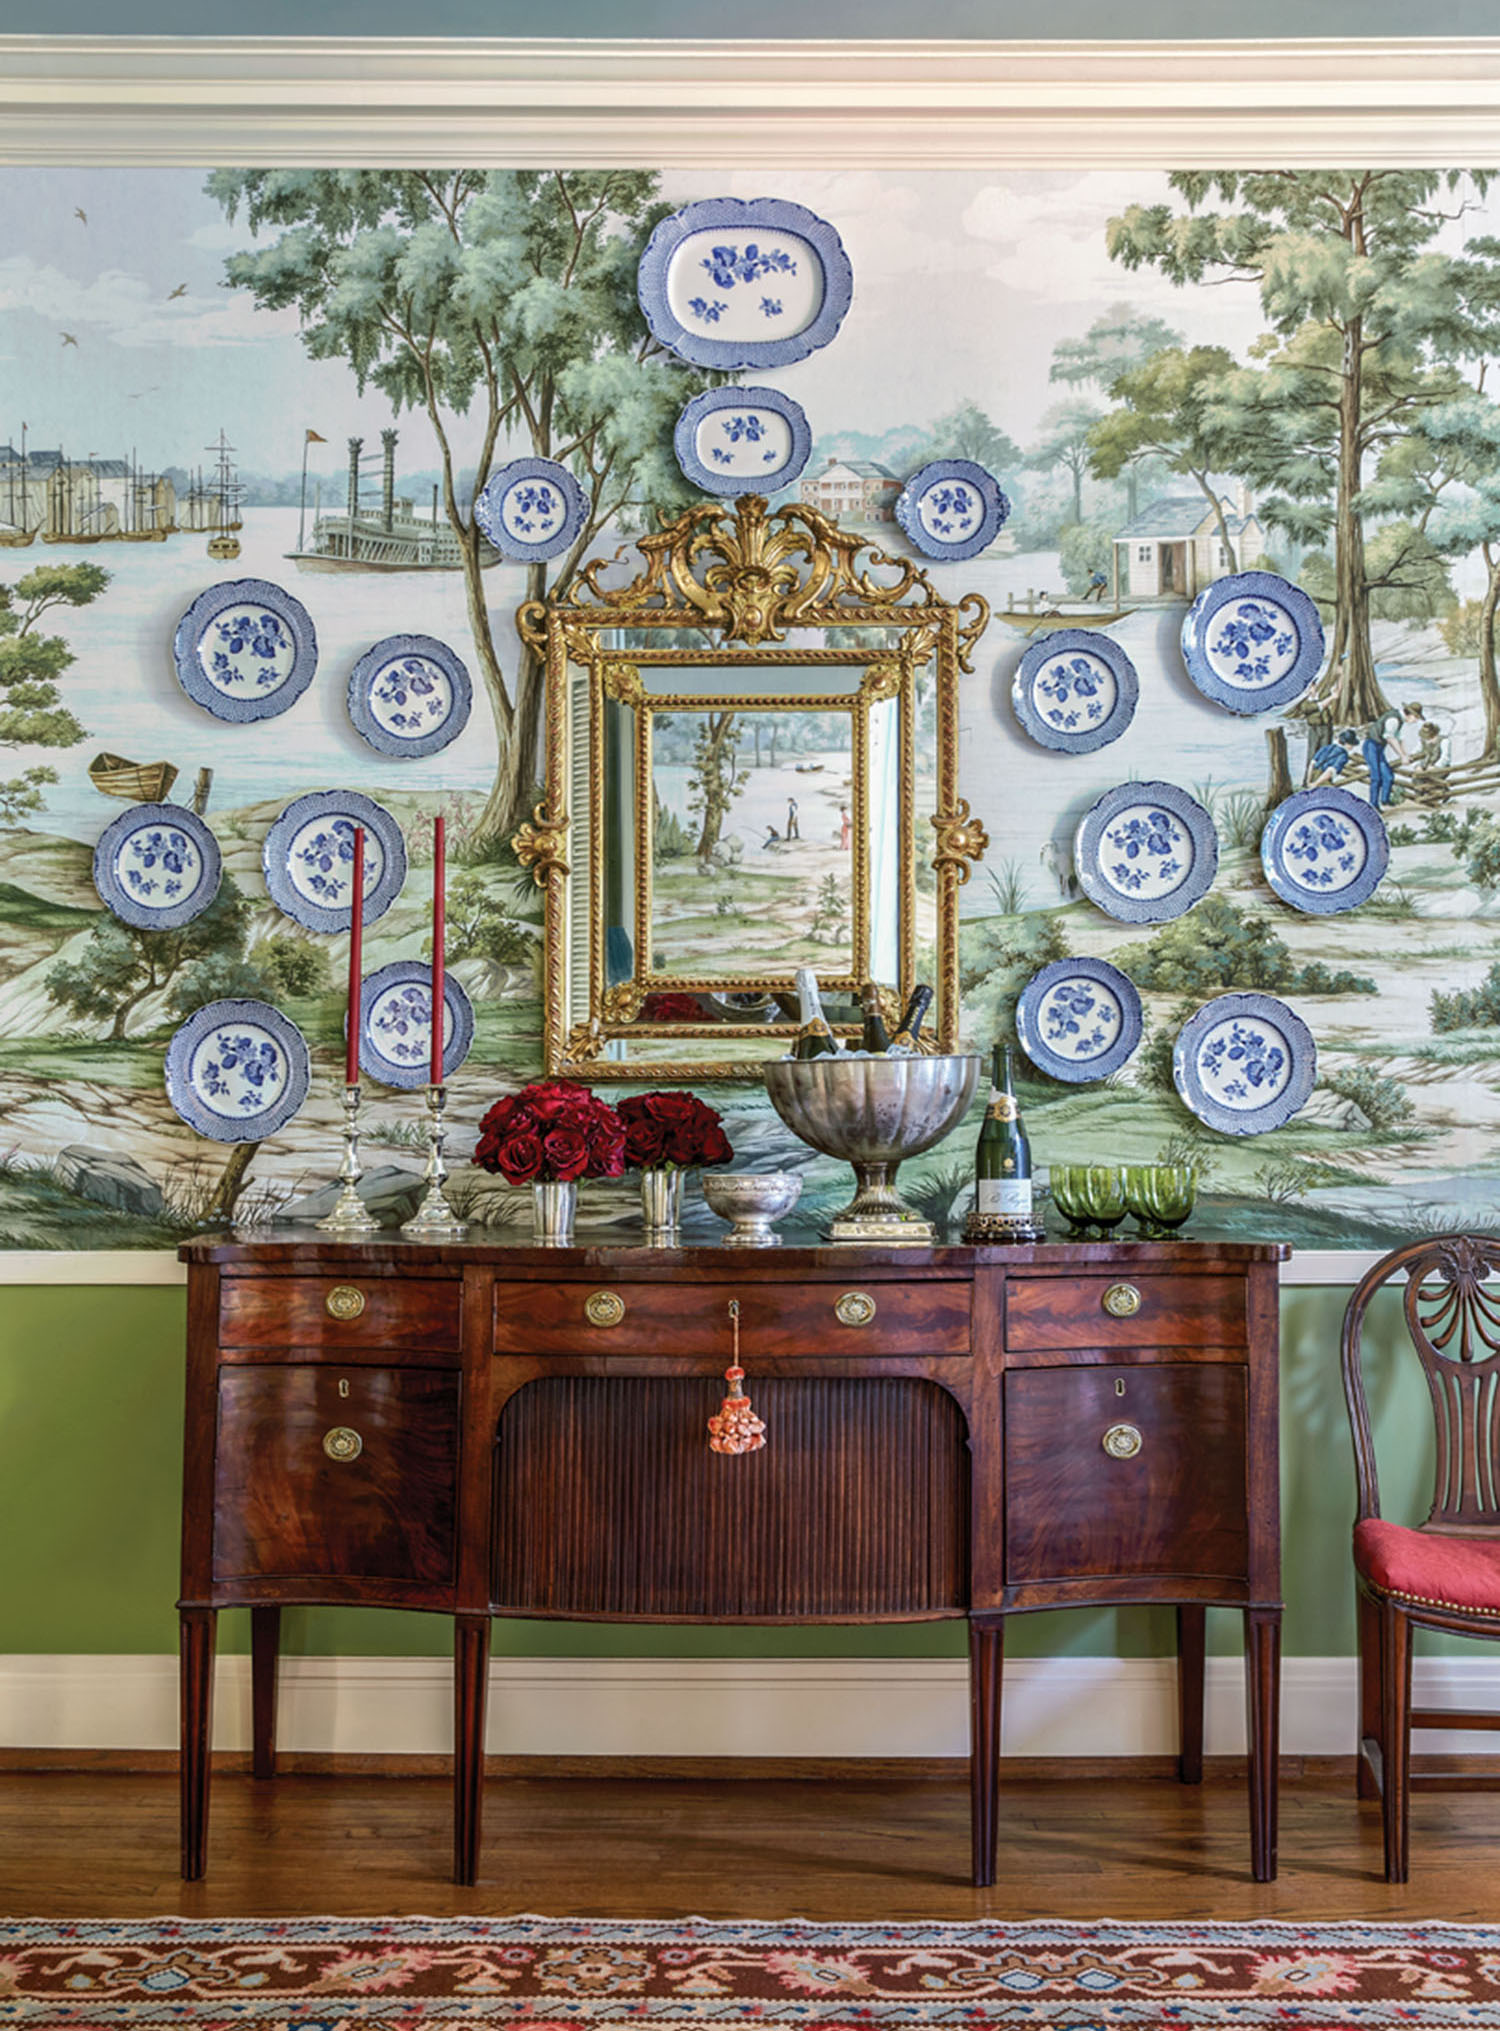 A collection of blue-and-white plates is displayed on a wall covered in scenic wallpaper in a green colorway, above an antique wooden sideboard. Laid out on the sideboard are a pair of tall thin burgundy tapers in silver candleholders, lush burgundy flowers in a pair of silver tumblers, champagne bottles chilling in a silver pedestaled champagne bucket, and green drinking glasses